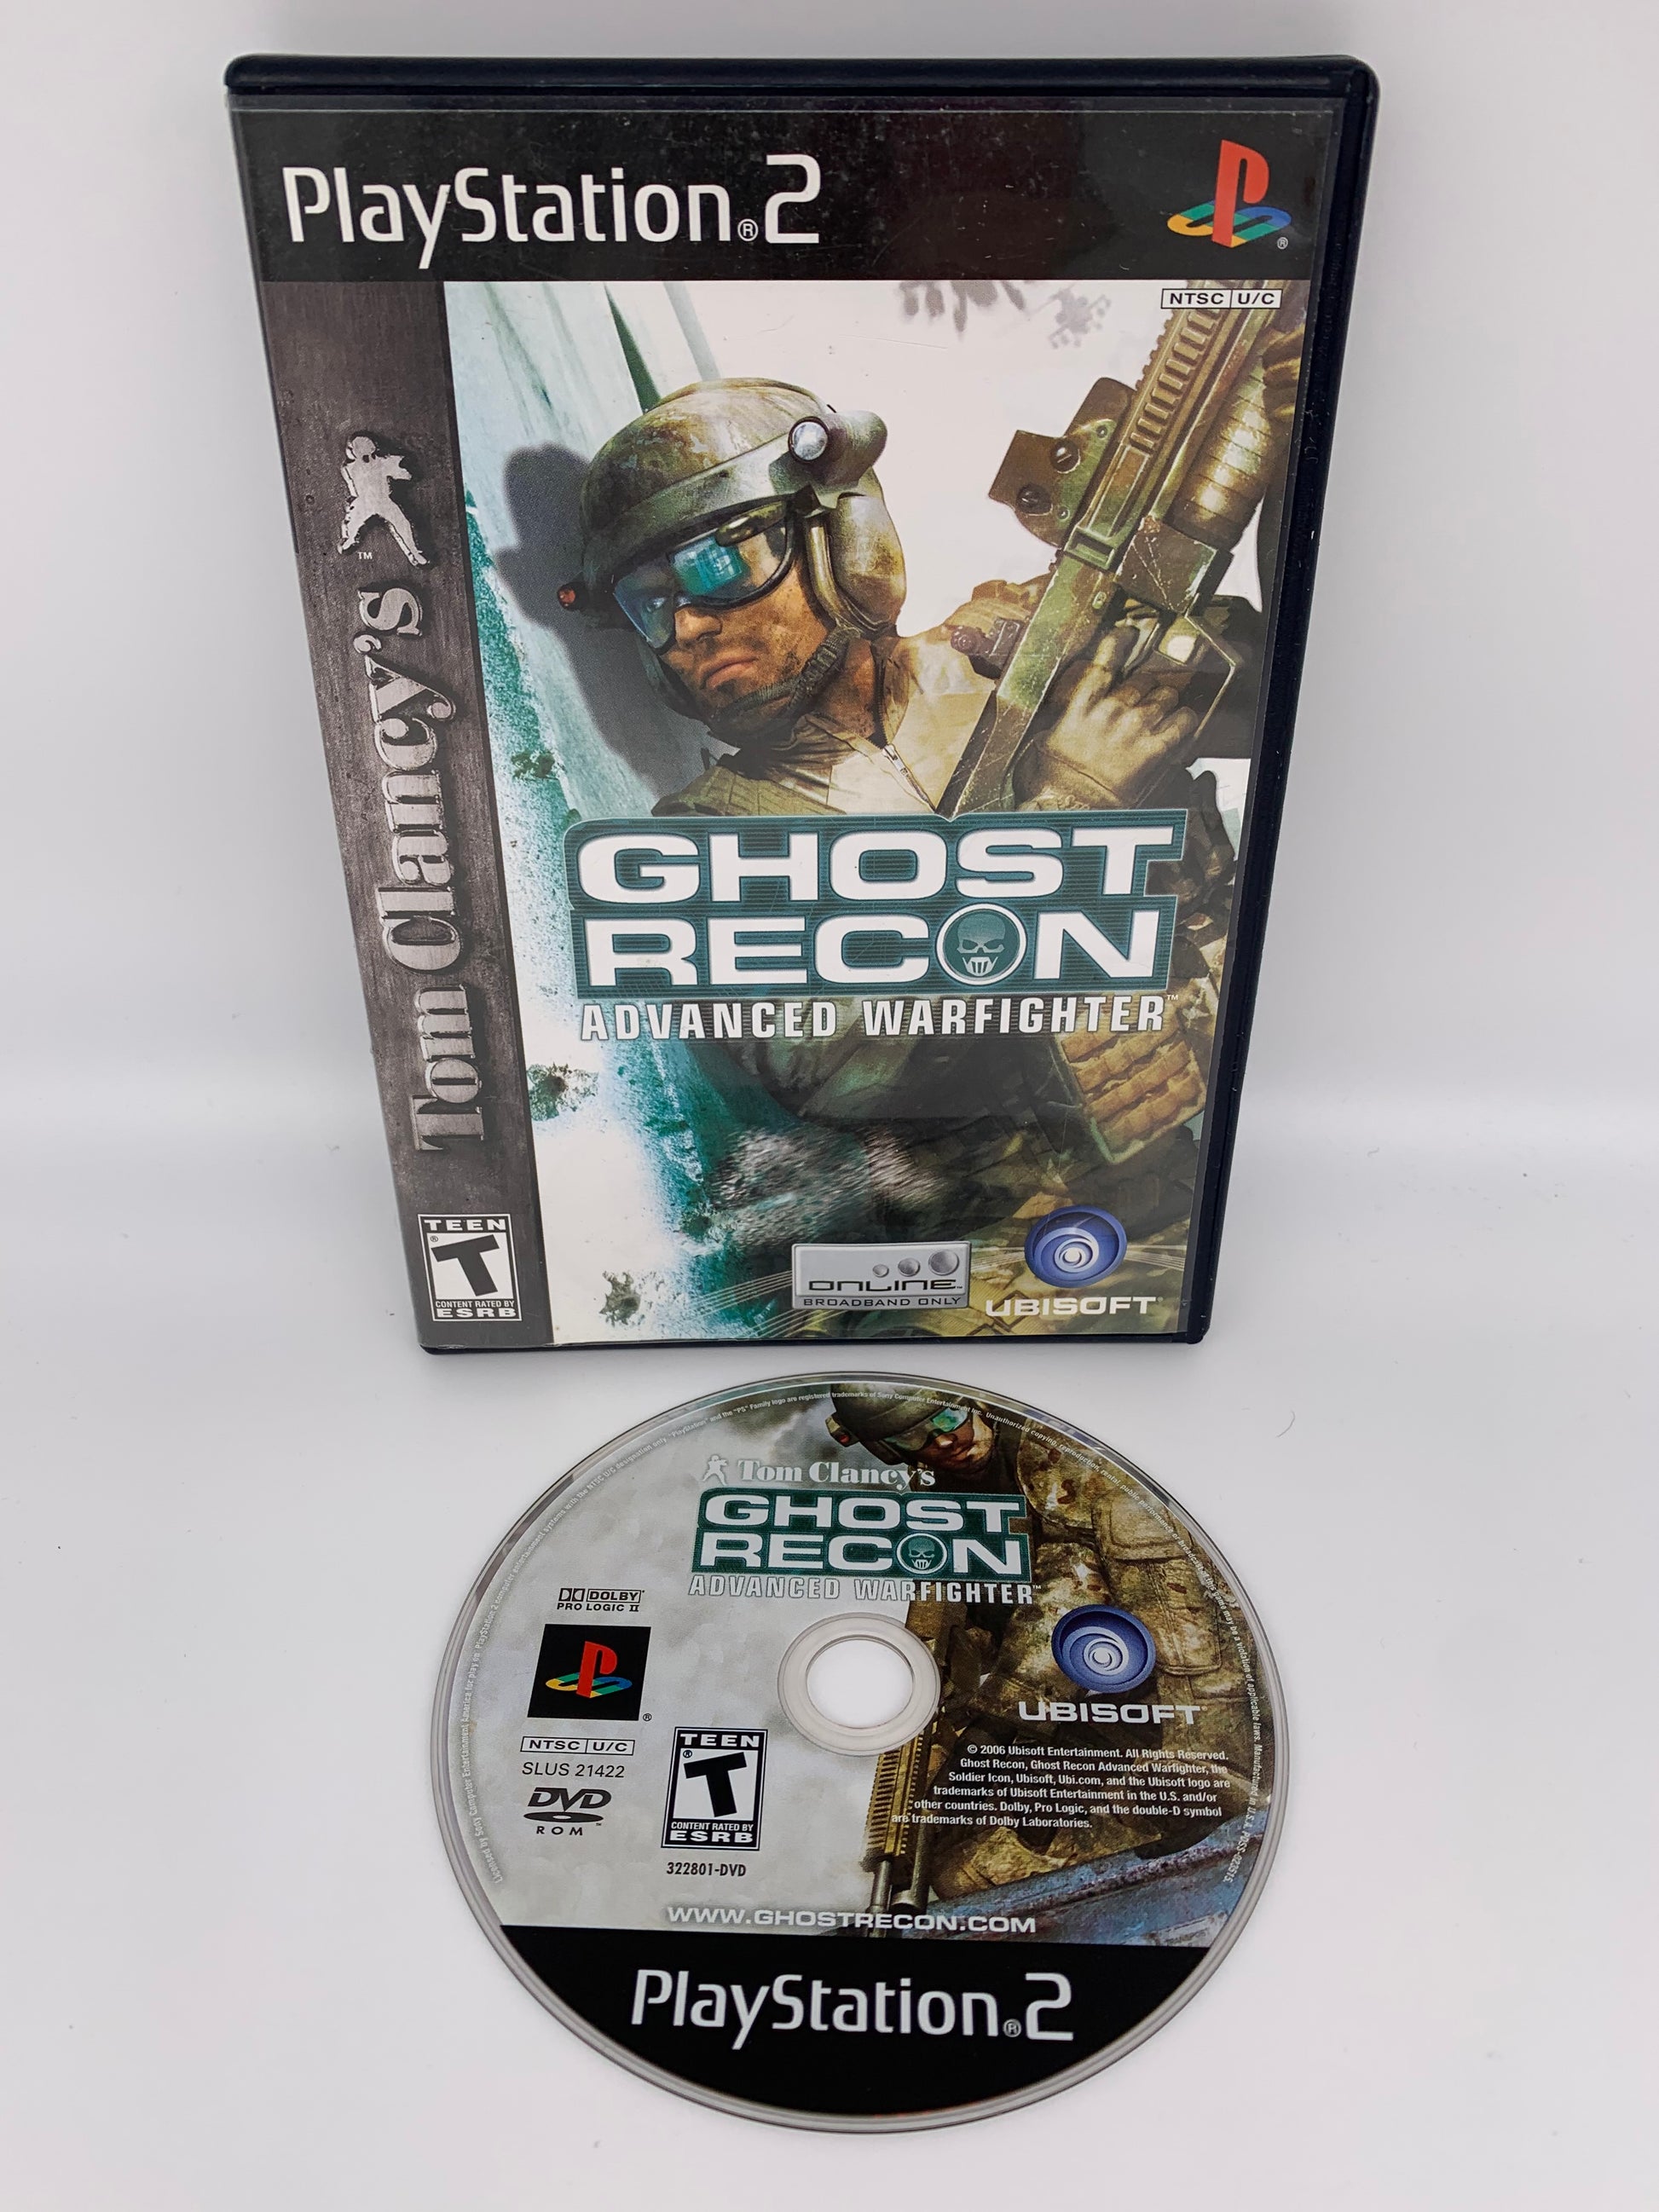 PiXEL-RETRO.COM : SONY PLAYSTATION 2 (PS2) COMPLET CIB BOX MANUAL GAME NTSC TOM CLANCY'S GHOST RECON ADVANCED WARFIGHTER